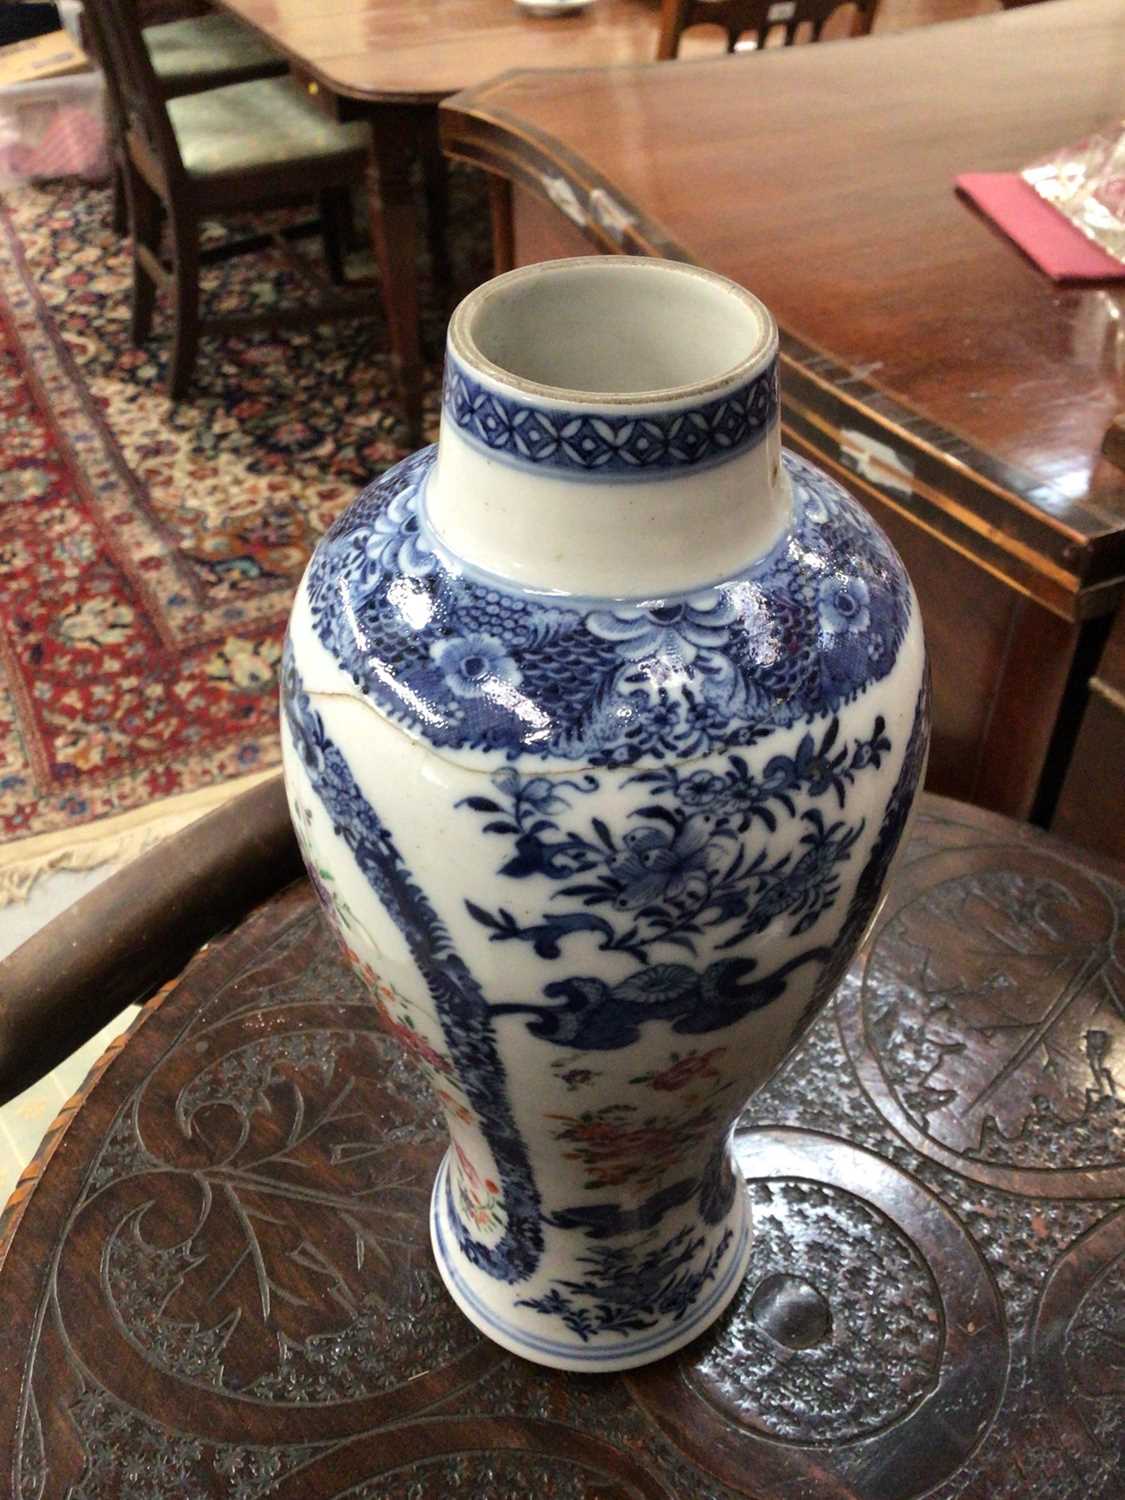 Pair of 18th century Chinese blue and white porcelain vases with polychrome painted decoration. - Image 3 of 6